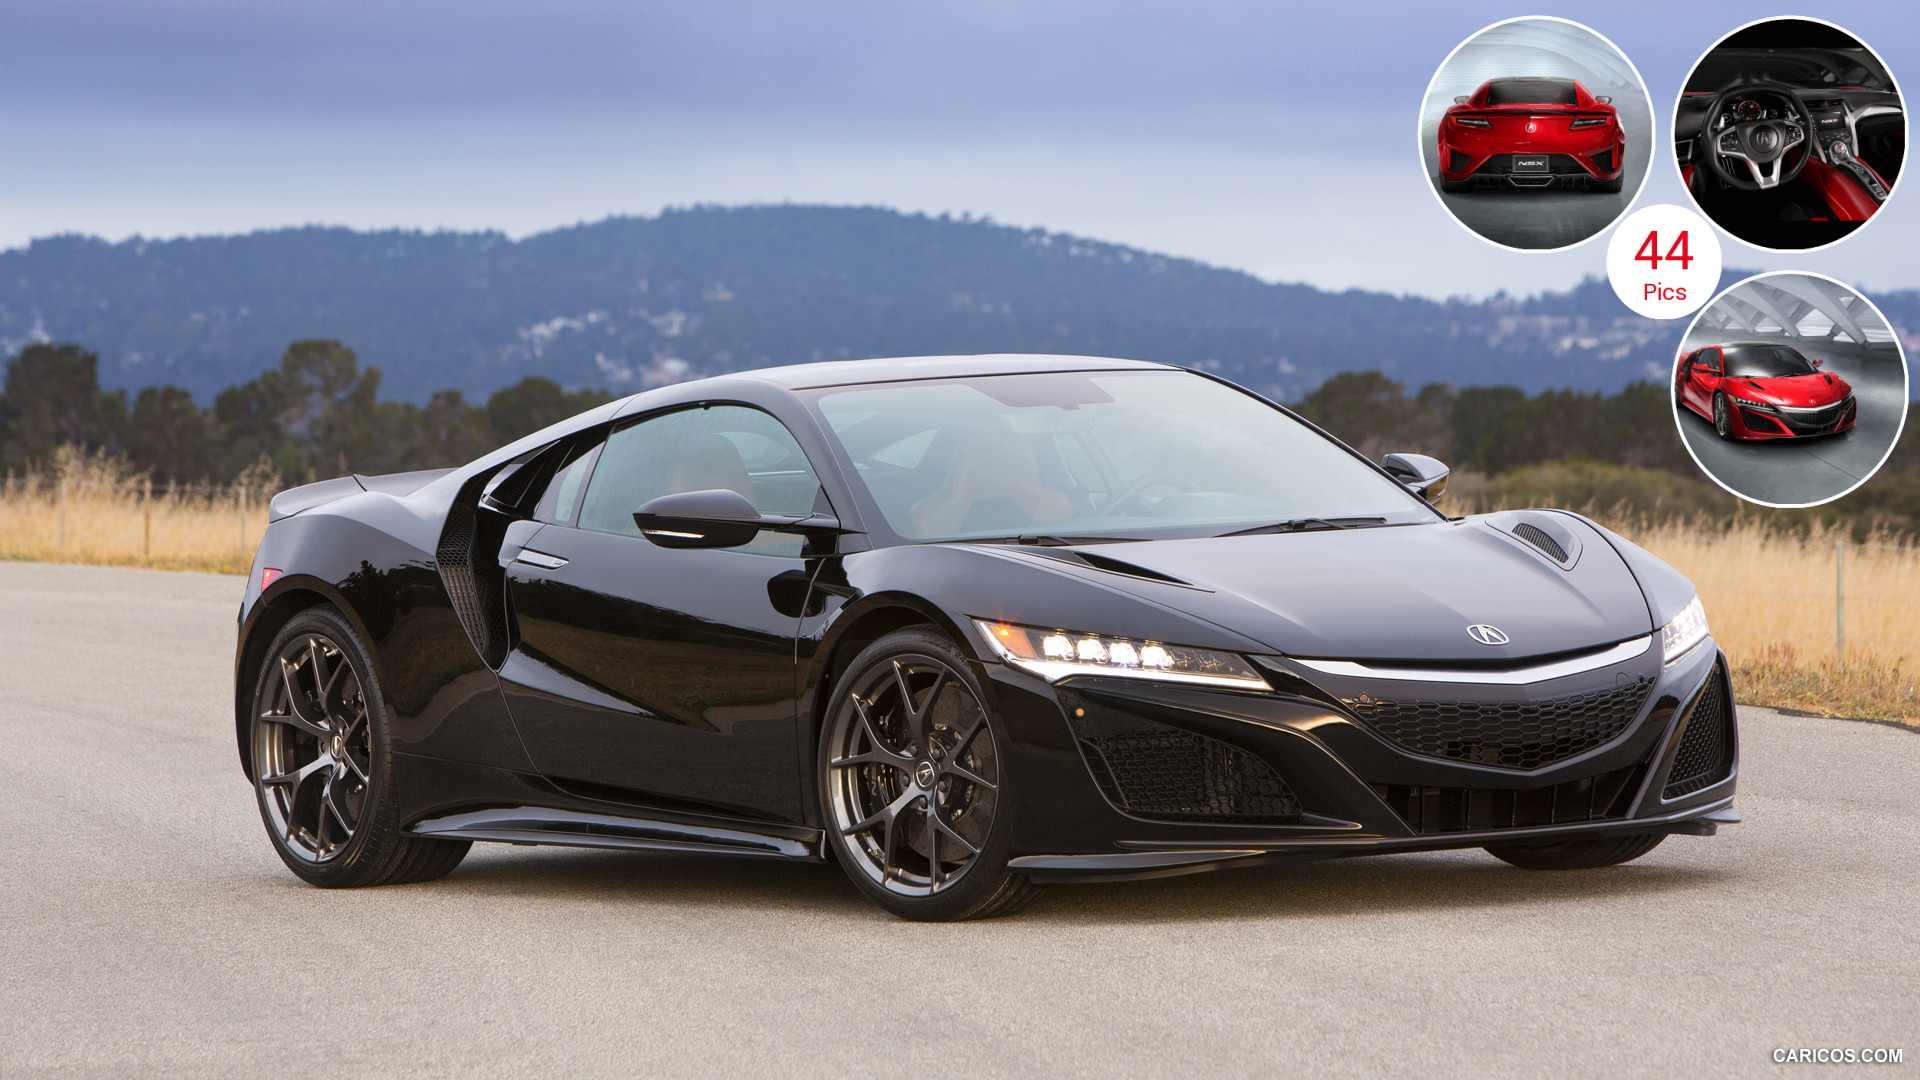 Acura NSX Wallpaper For Pc